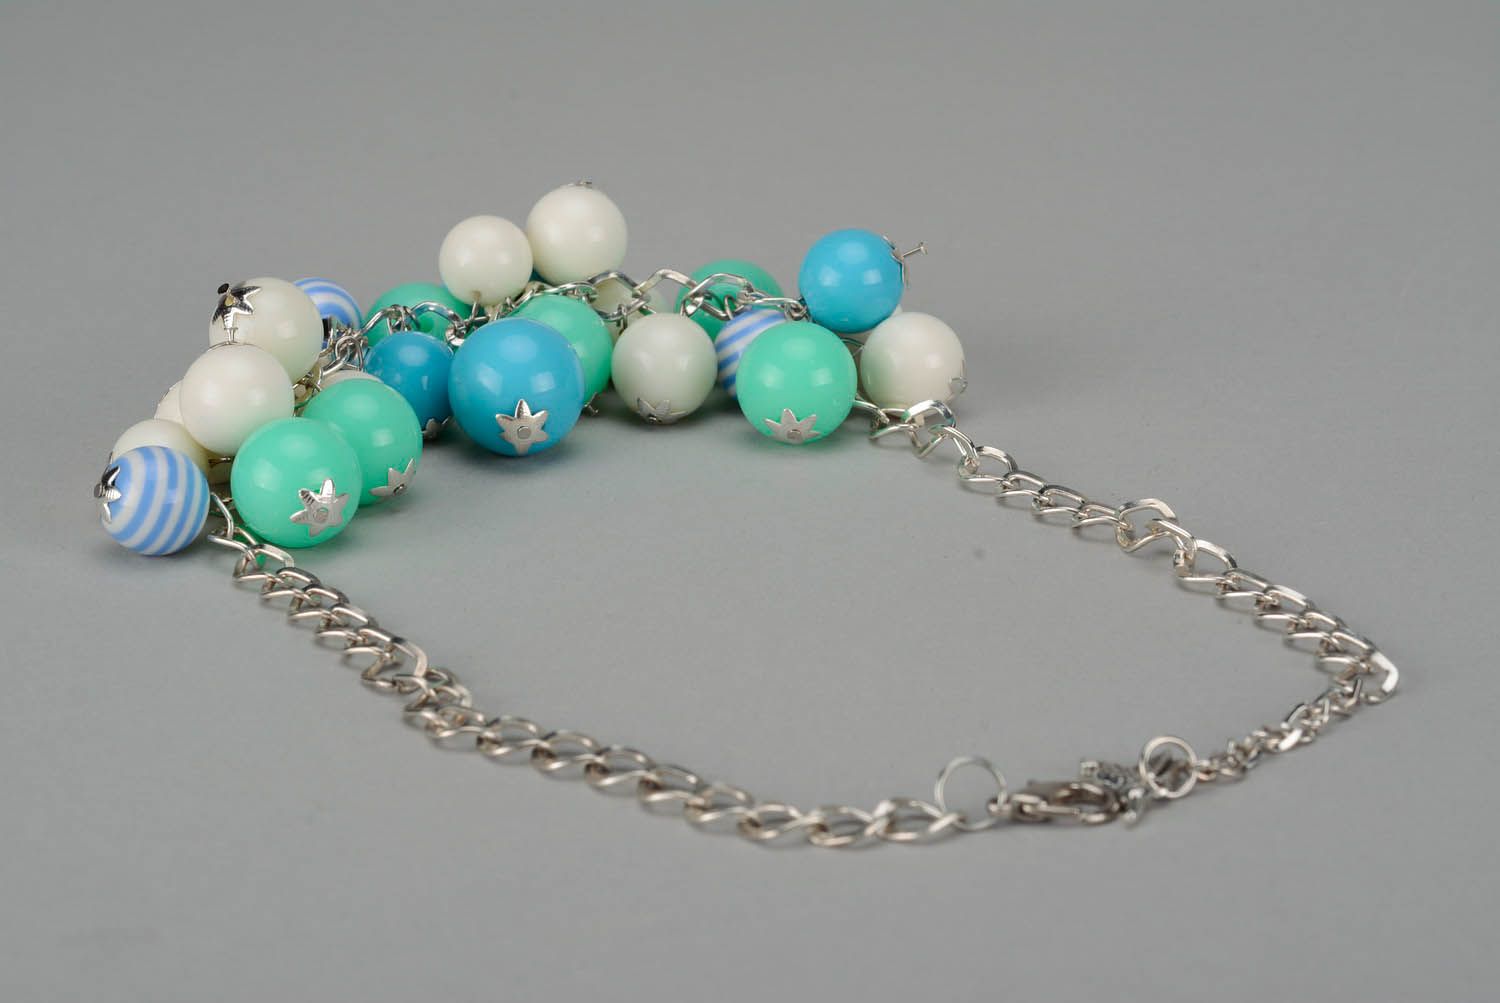 Necklace made of acrylic beads photo 3